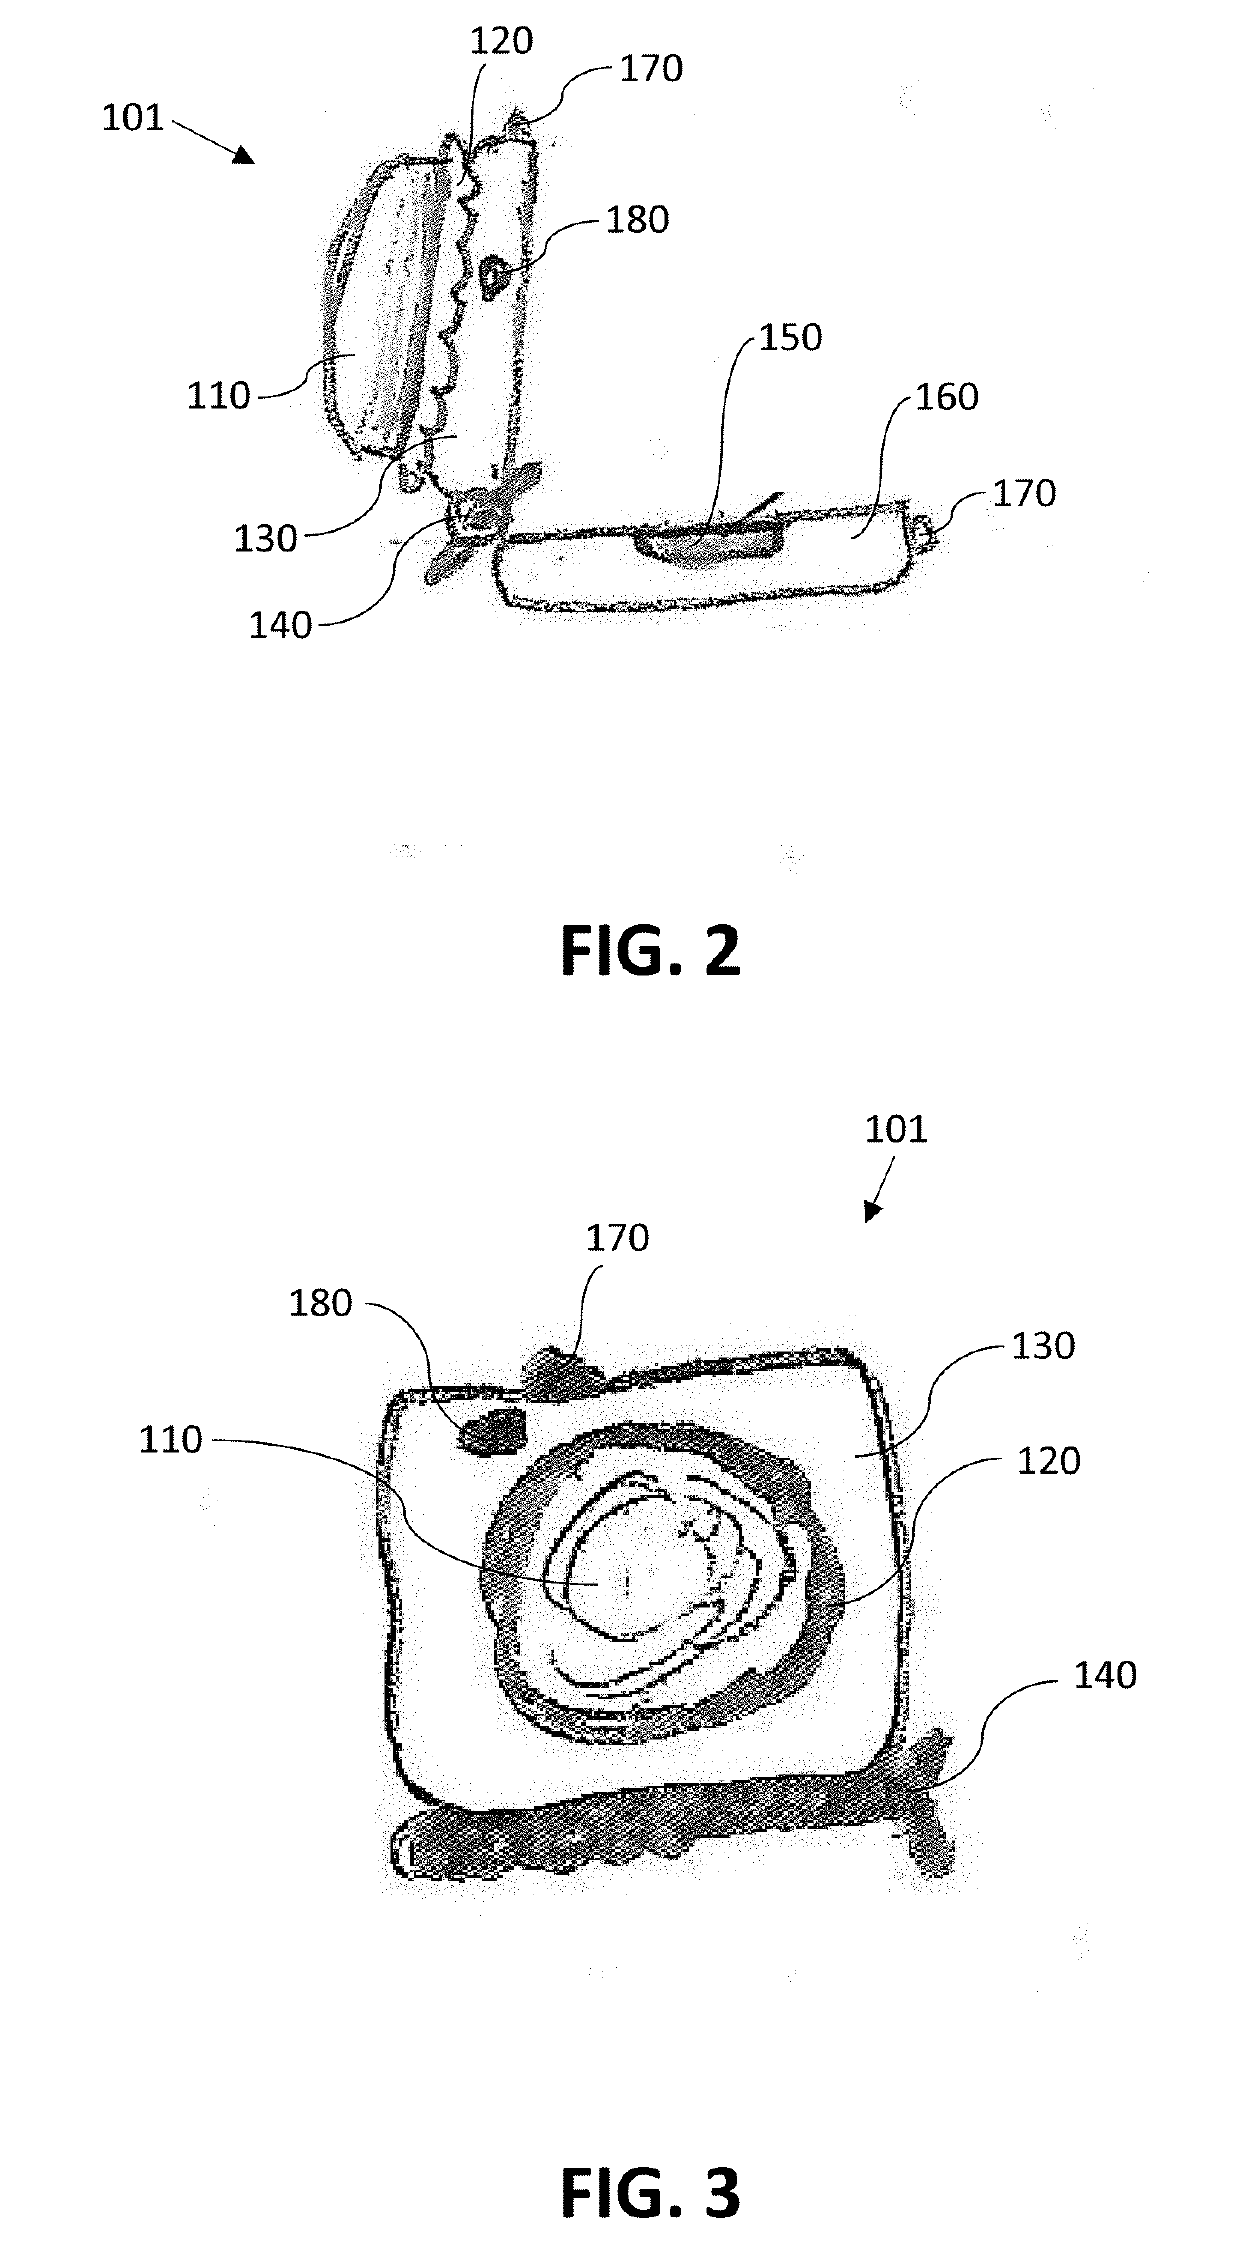 Portable Light Apparatus For Vehicle-Related Uses Including As Temporary Headlight Or Taillight